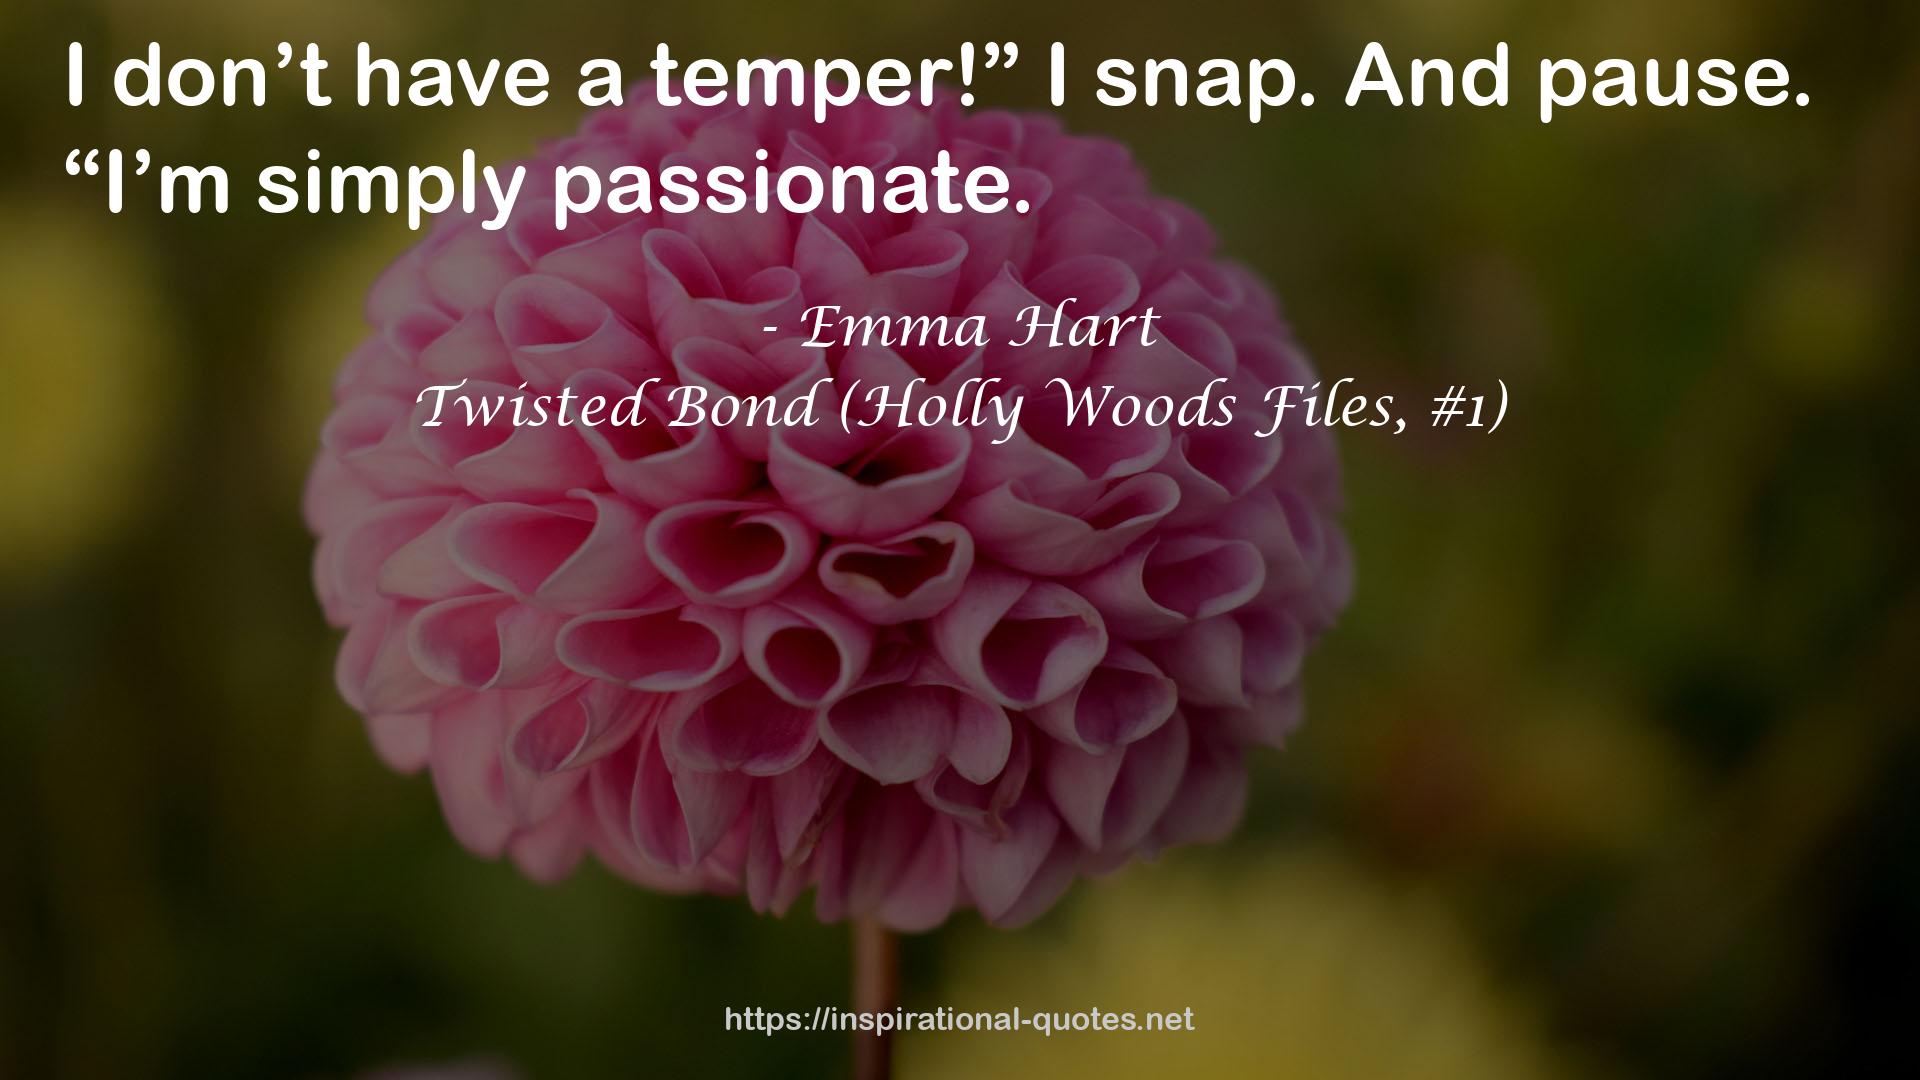 Twisted Bond (Holly Woods Files, #1) QUOTES